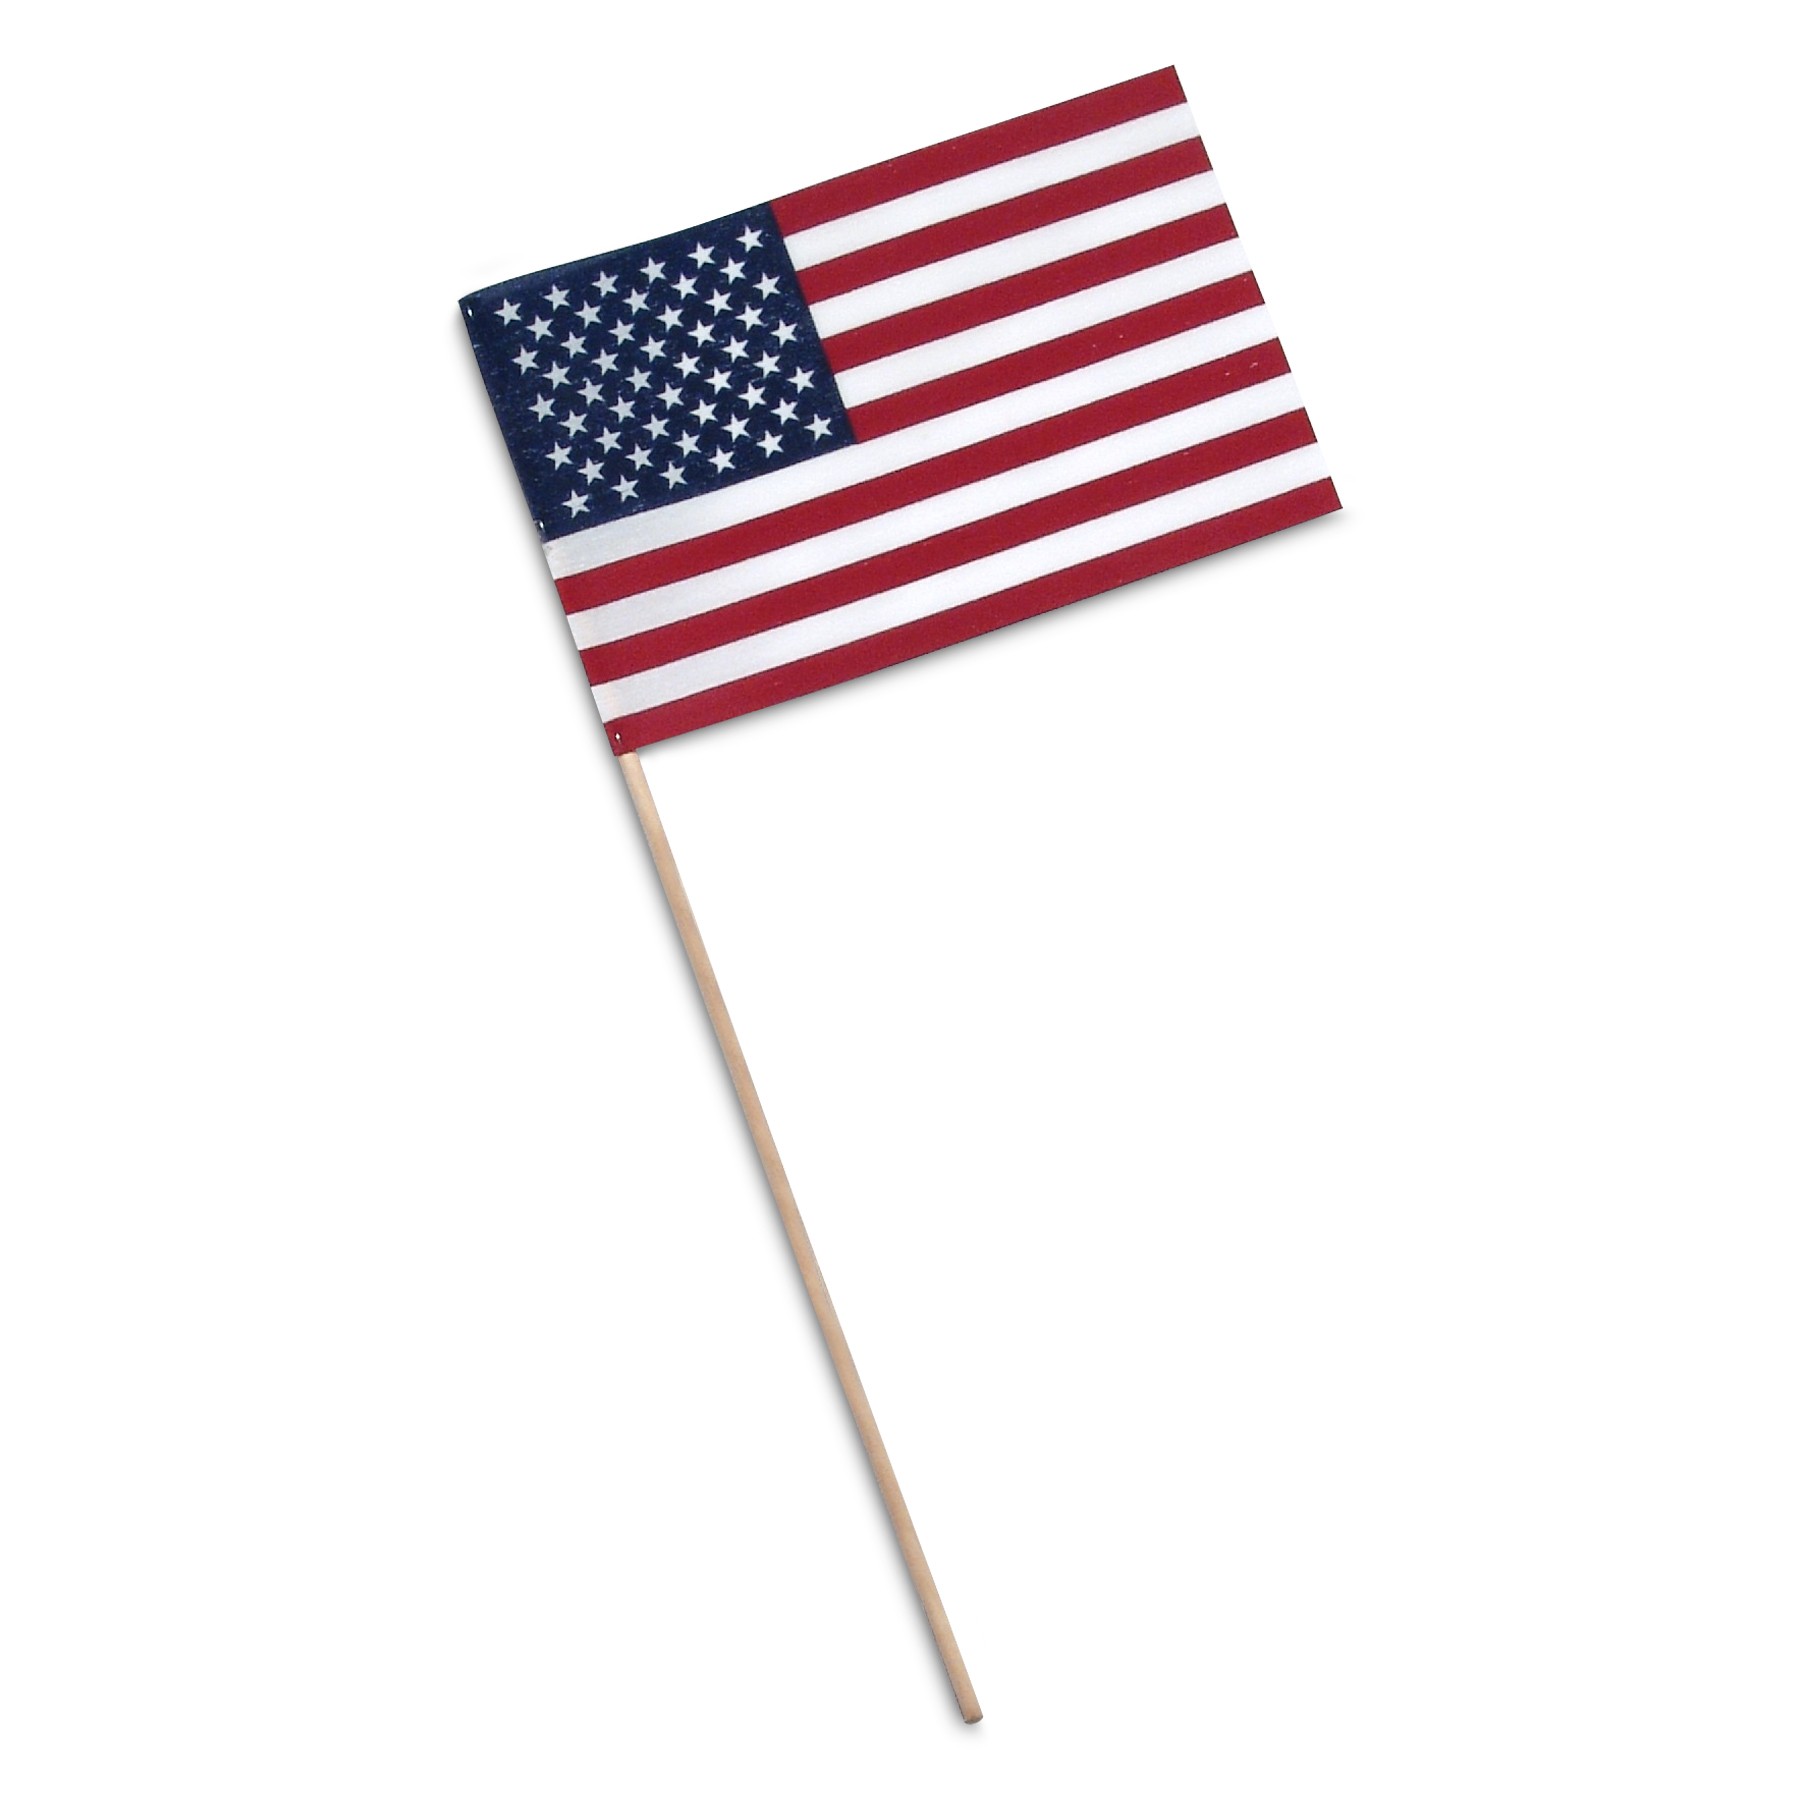 US Stick Flag 8in x 12in Economy - Wood Stick - No Spear Tip